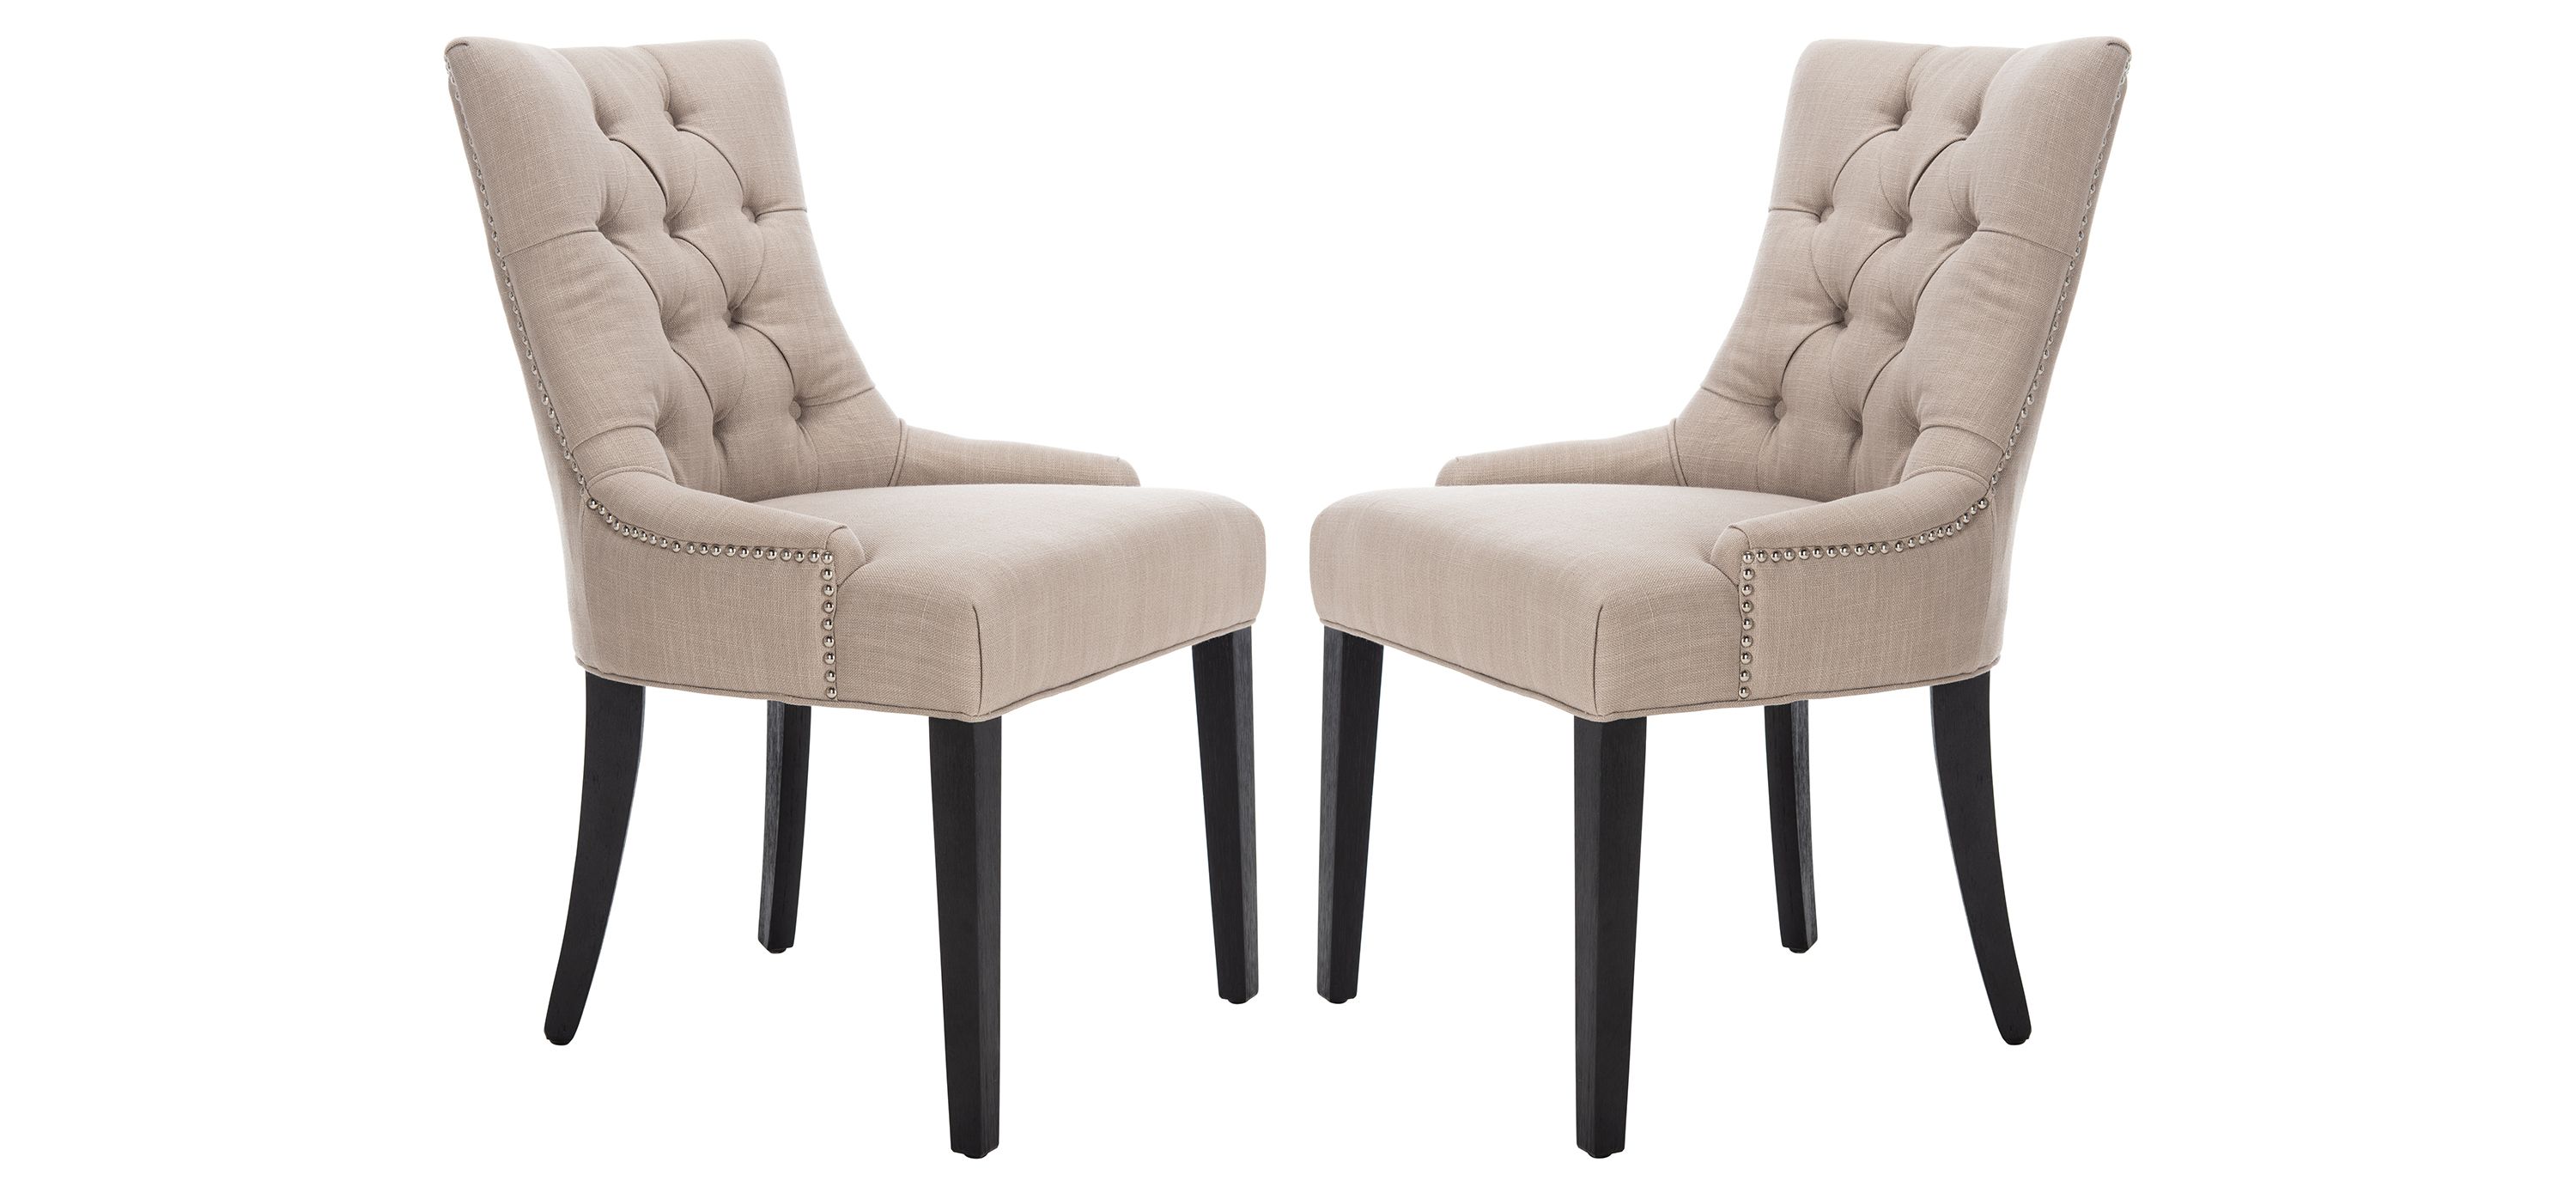 Abby Tufted Dining Chair - Set of 2